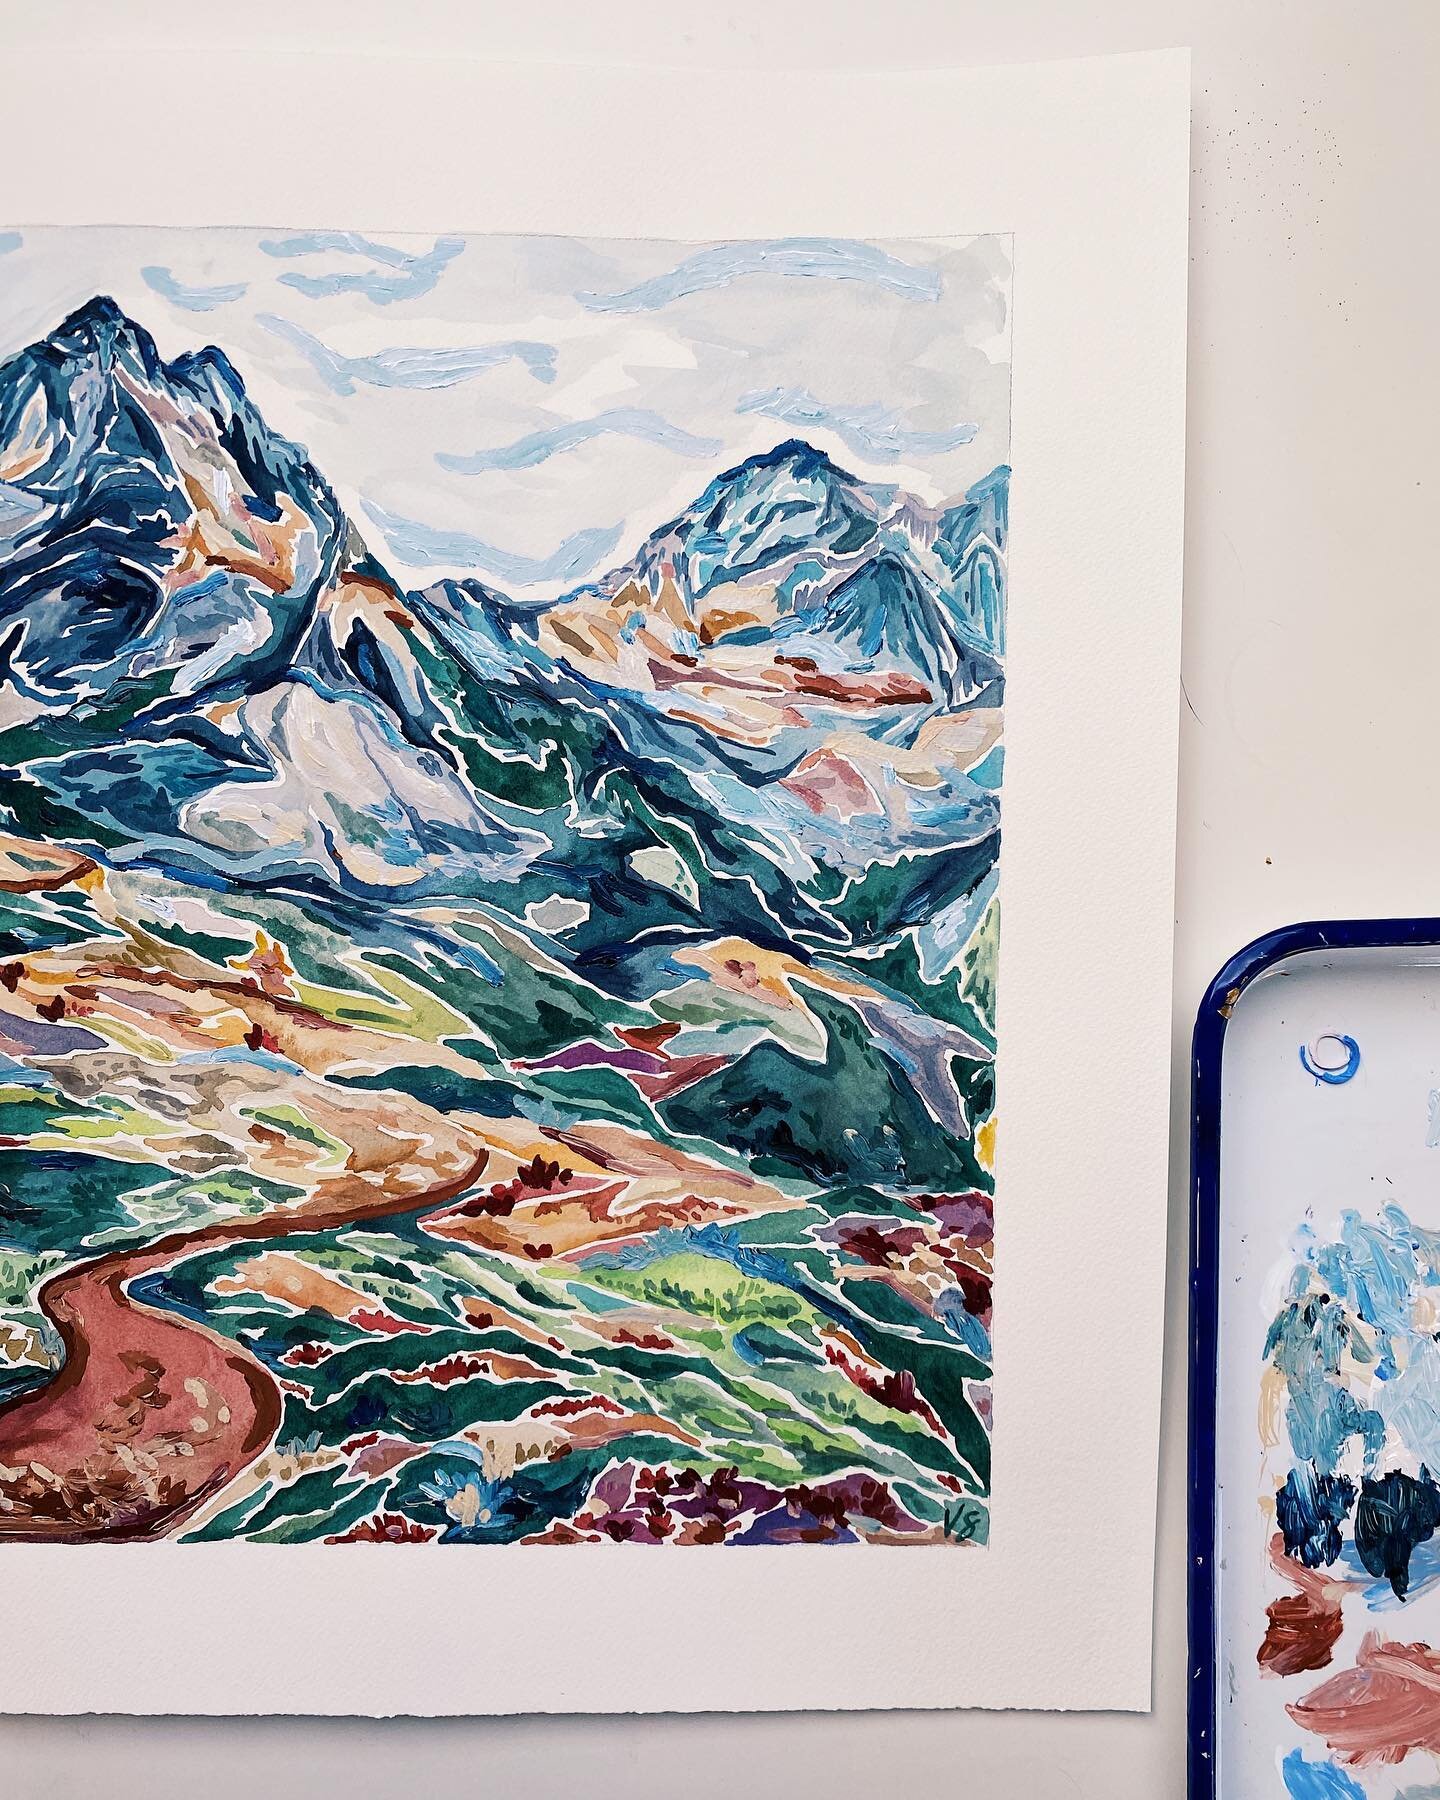 finishing touches on &lsquo;Maple Pass&rsquo; &bull;&bull;&bull; based on a technicolor, fall backpacking trip through the North Cascades that lives on vividly